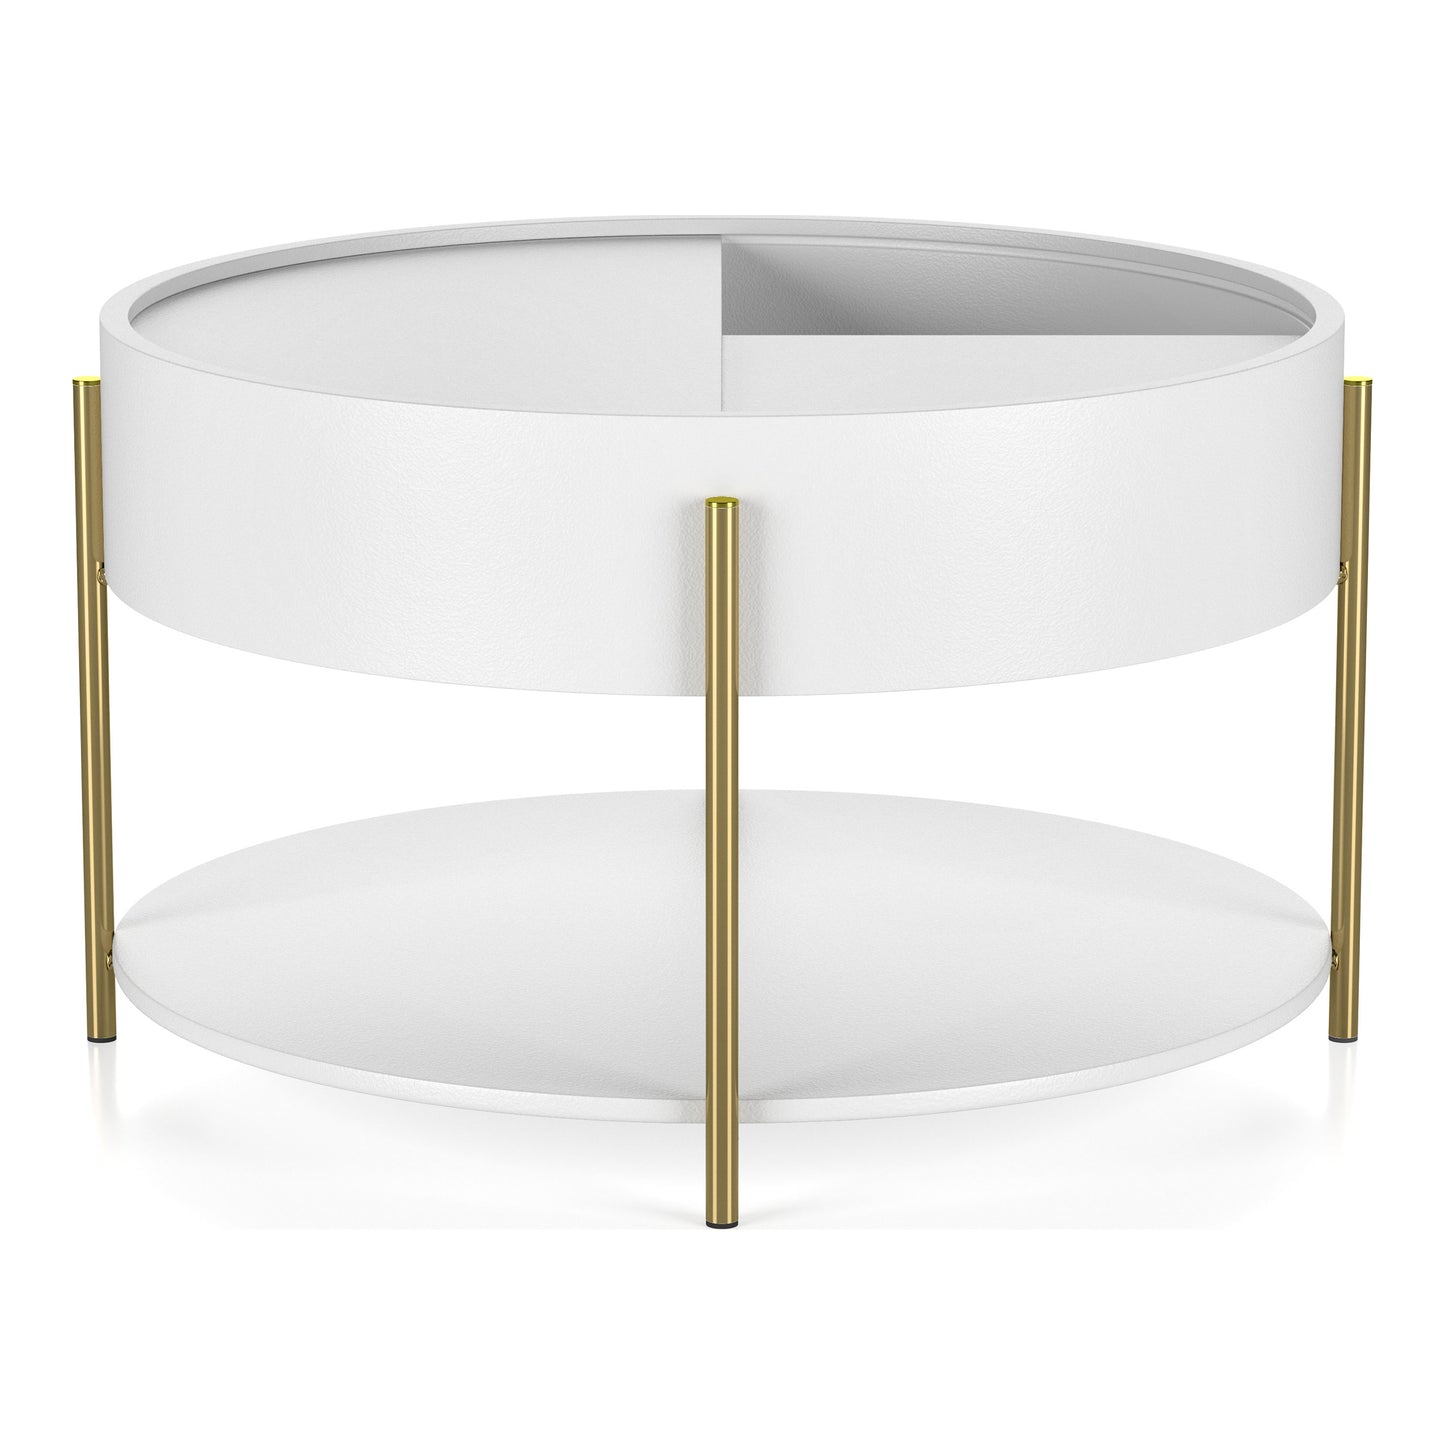 Angled modern white and gold round storage coffee table with top partially open on a white background